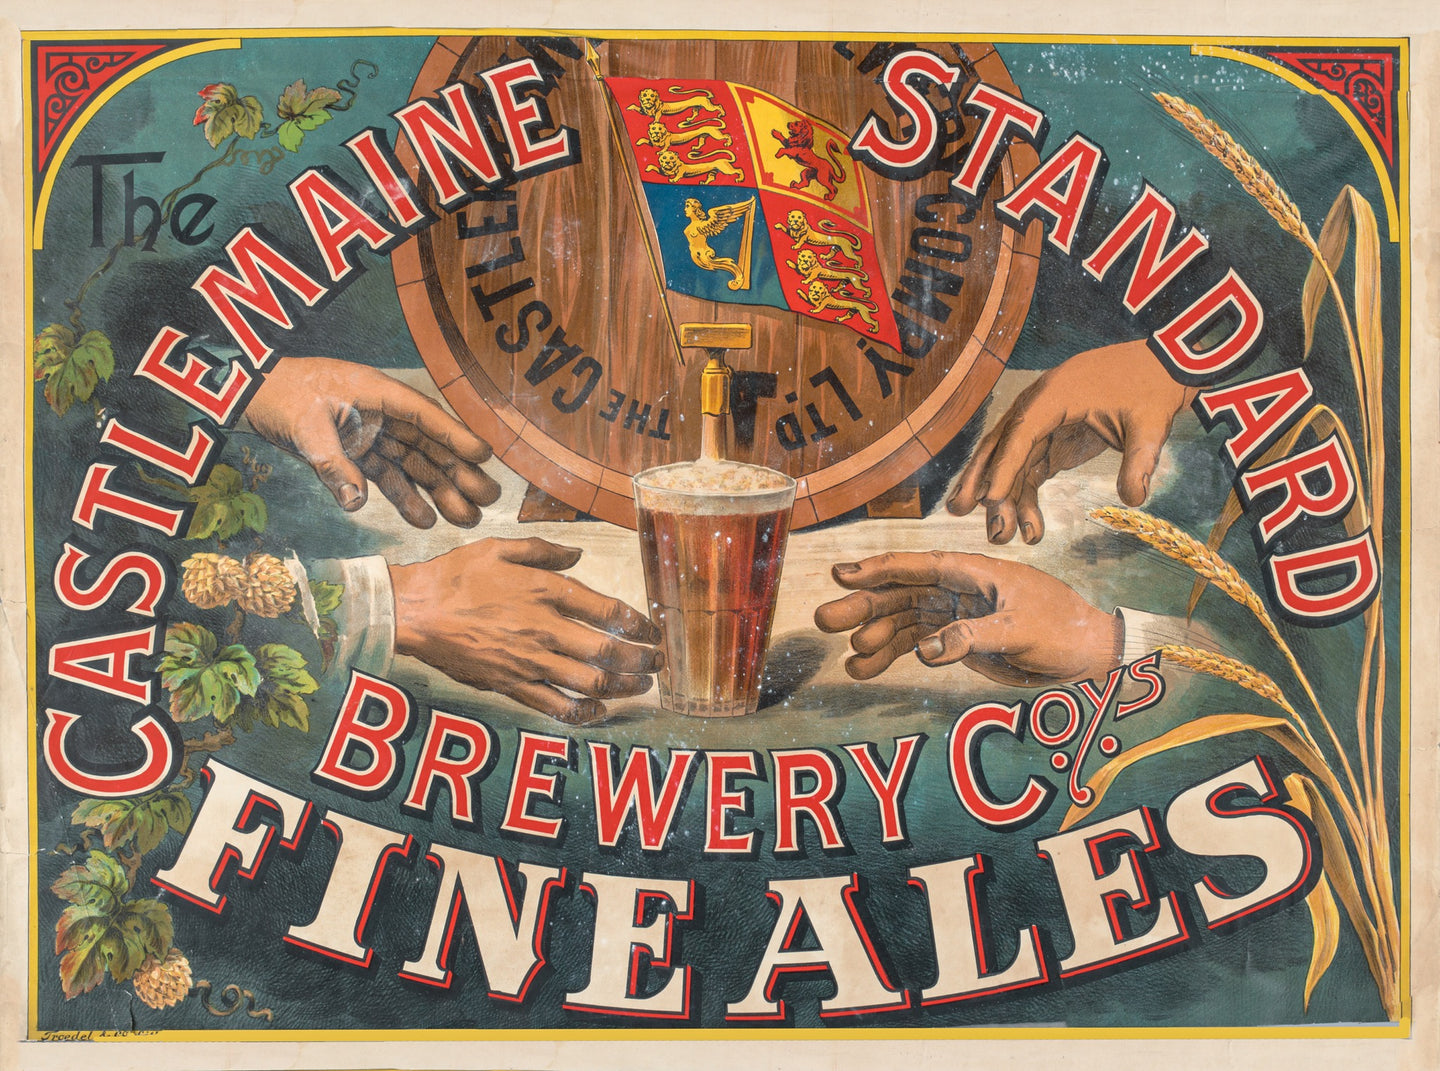 Castlemaine Standard Brewery Co. Finest Ales, 1880s